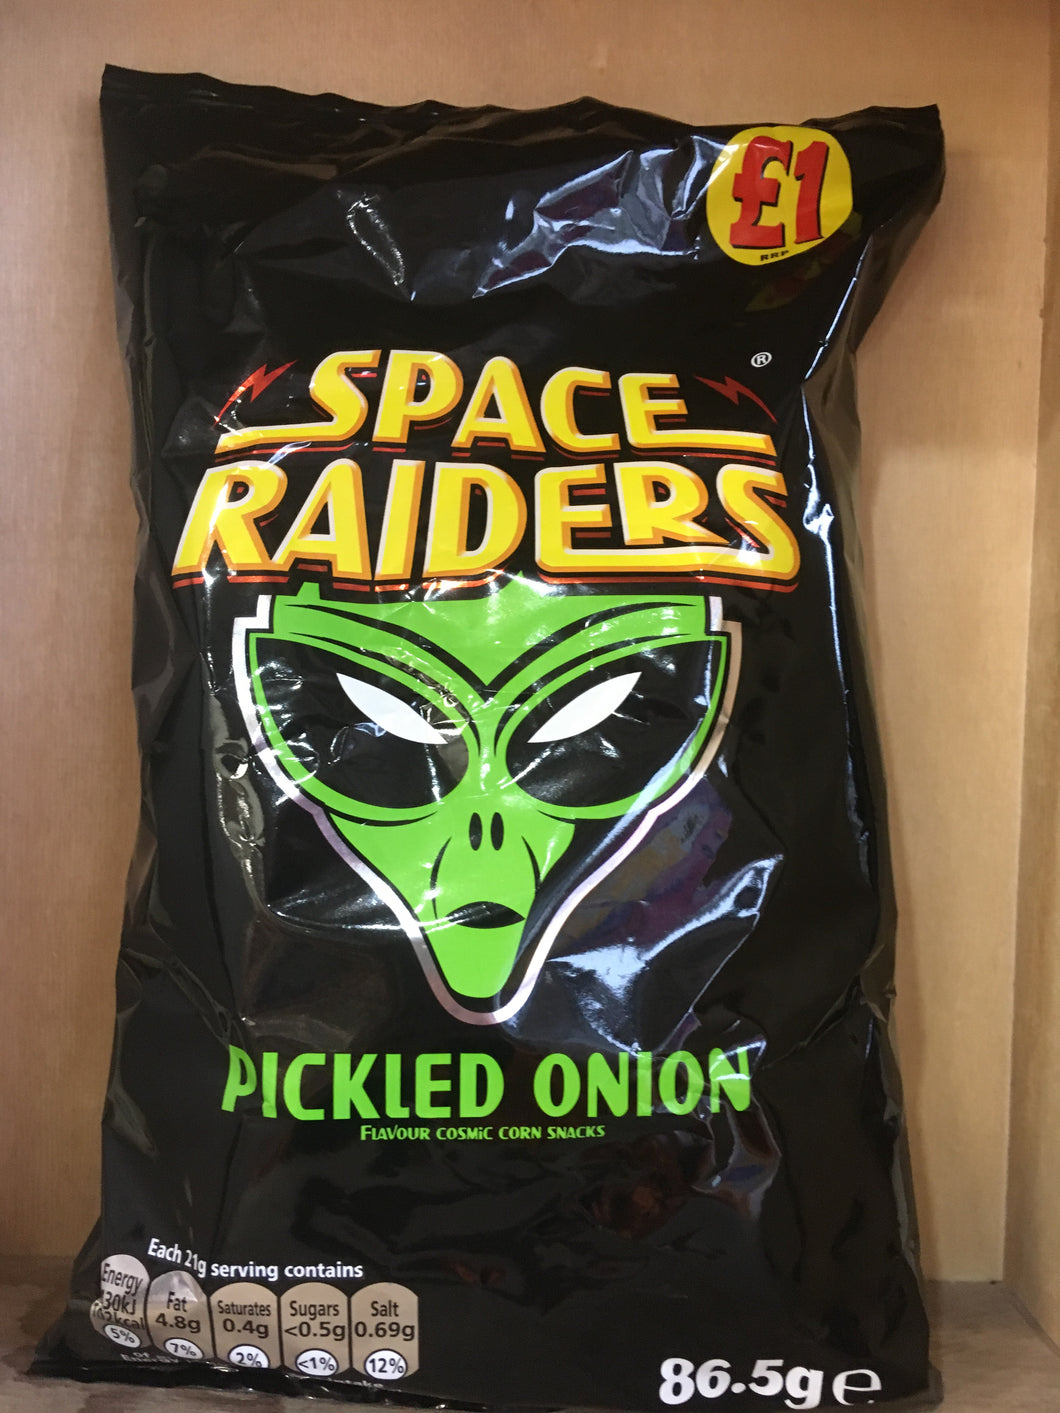 Space Raiders Pickled Onion 86.5g